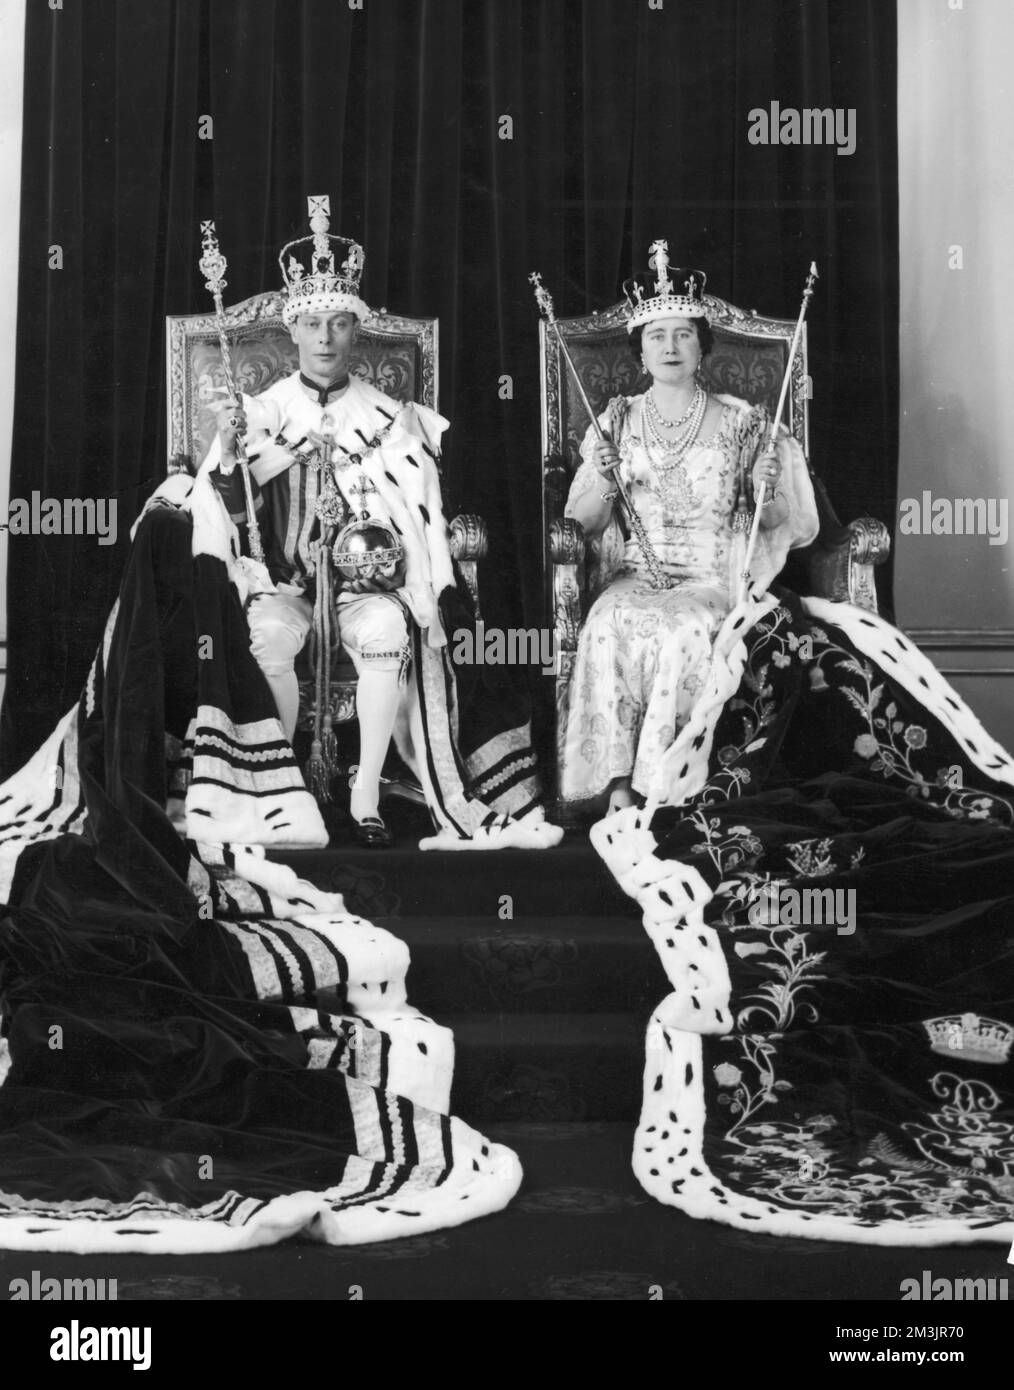 An Offical Photograph of the Coronation of King George VI, seated with his Wife the Queen, Elizabeth.  1937 Stock Photo